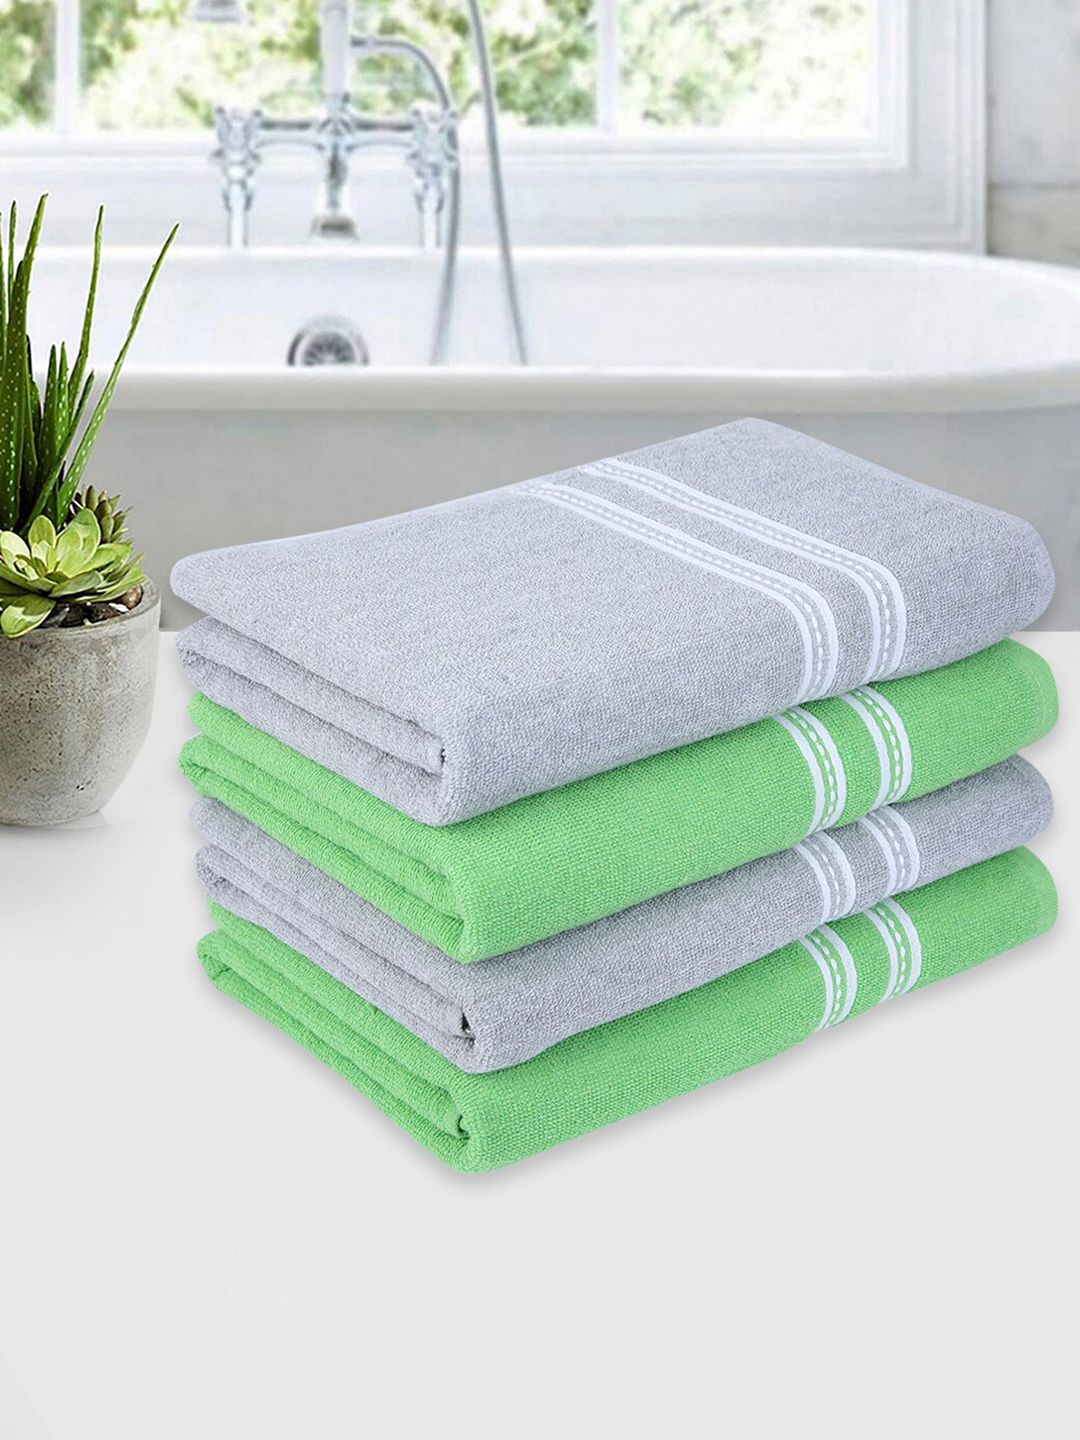 ROMEE Set Of 4 Green & Silver Solid 500 GSM Cotton Bath Towels Price in India